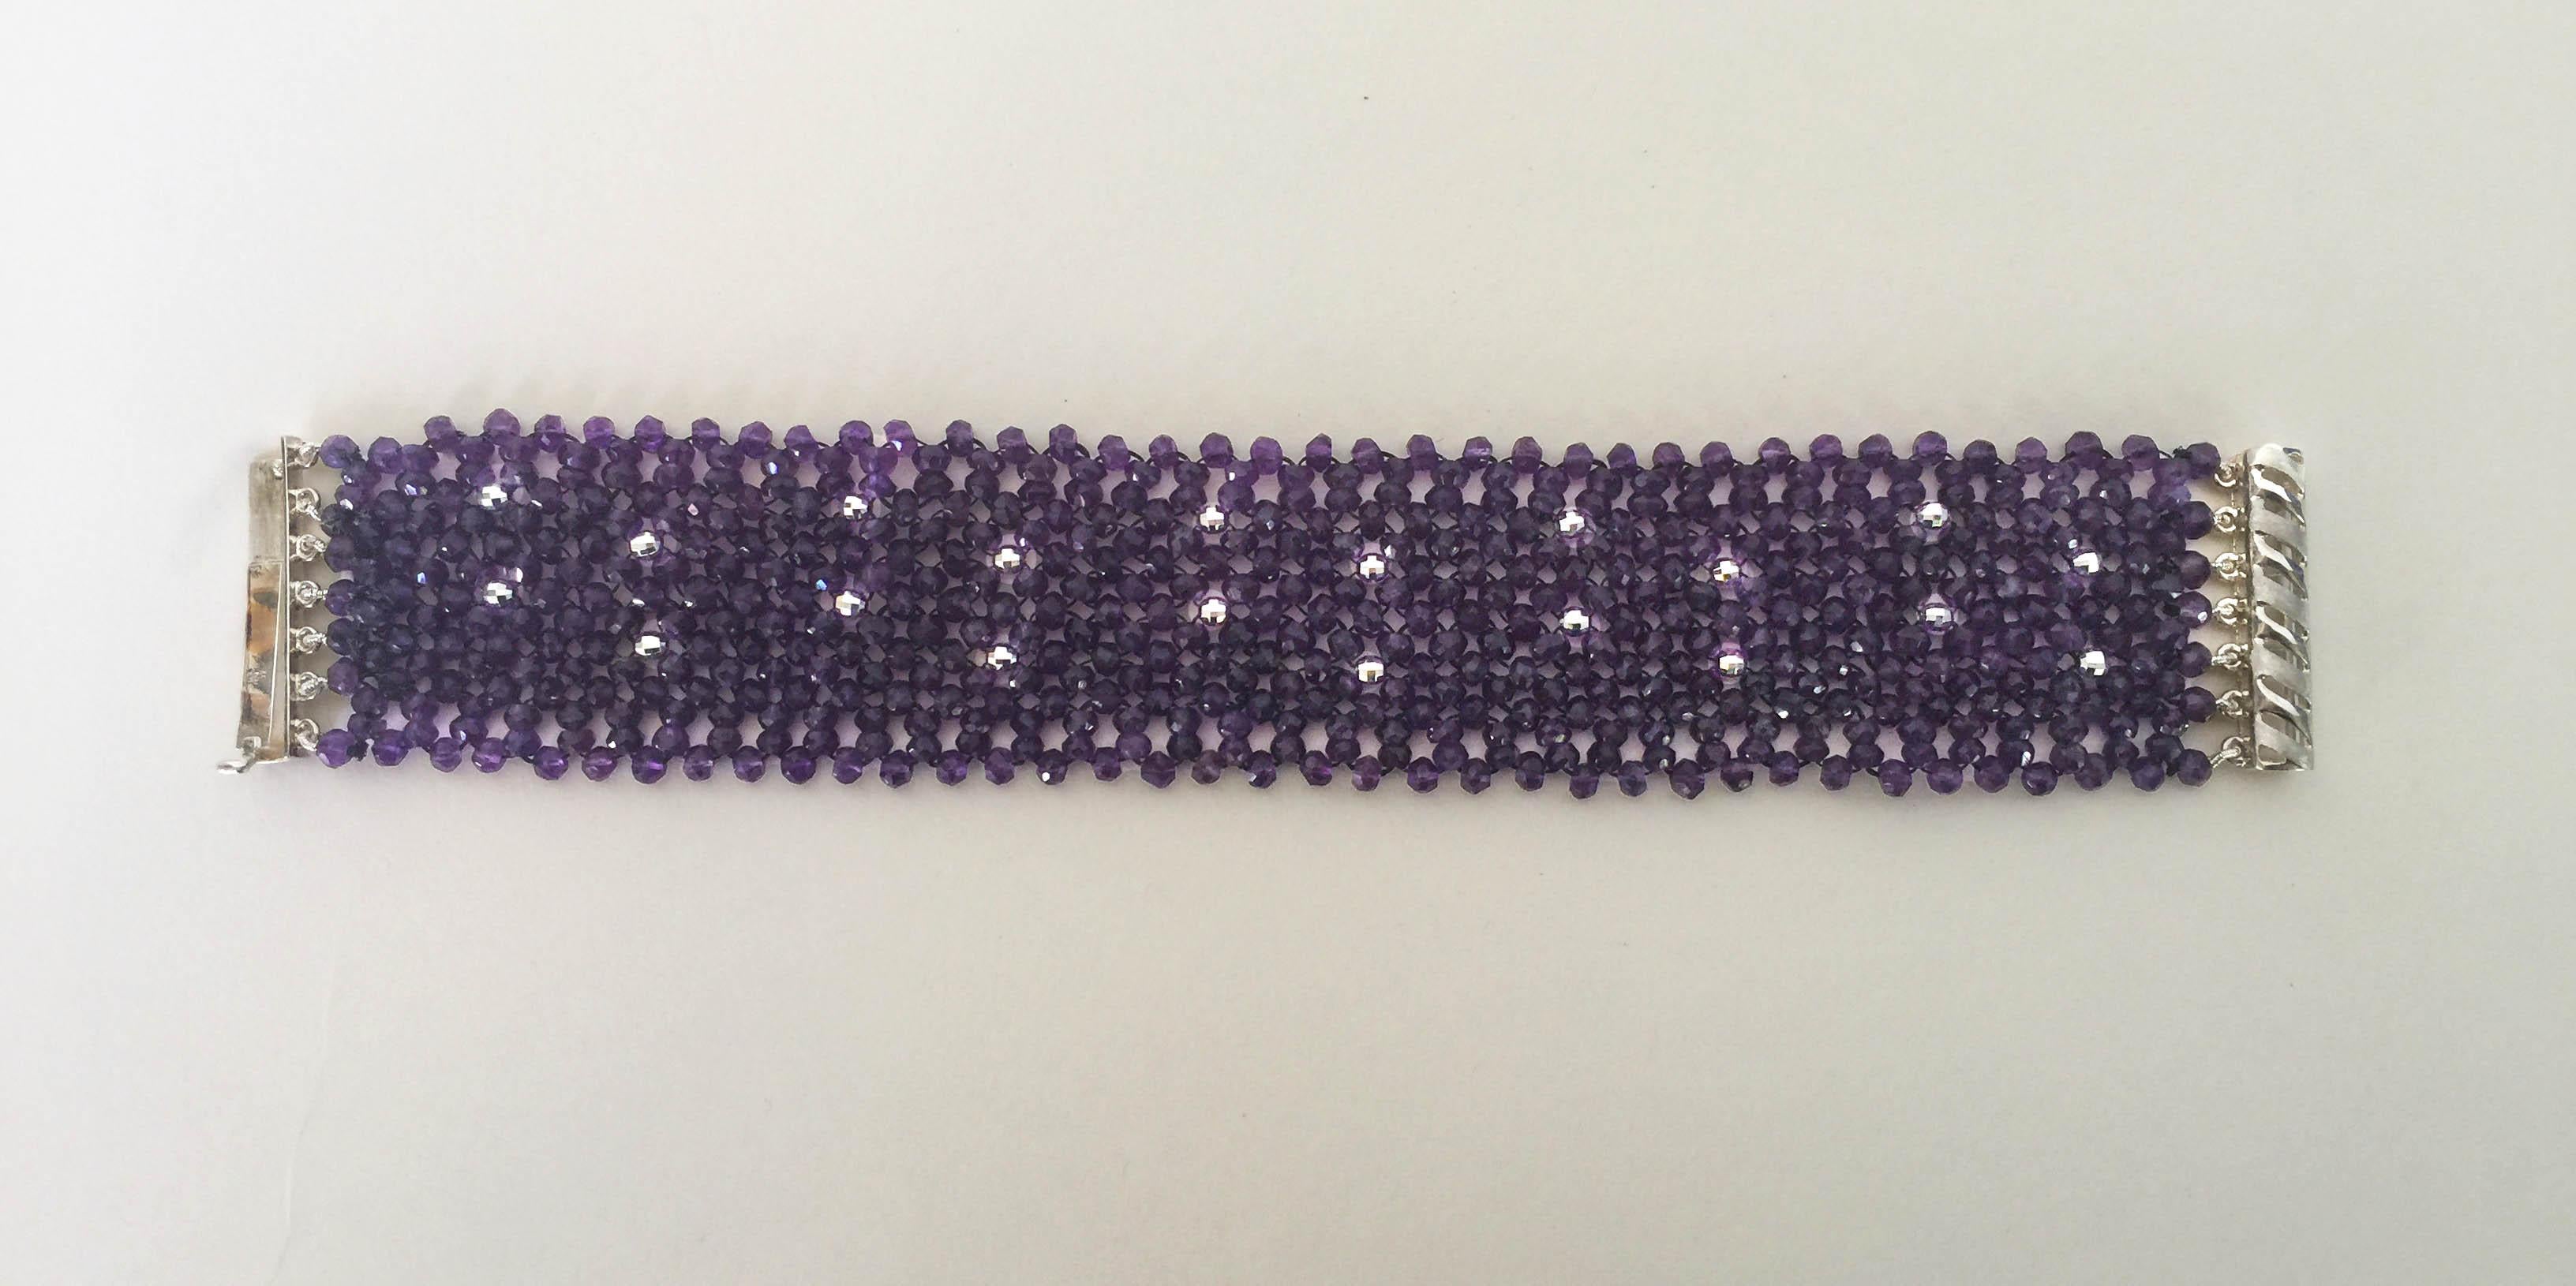 Women's Woven Faceted Amethyst Cuff Bracelet with Sterling Silver Clasp and Beads